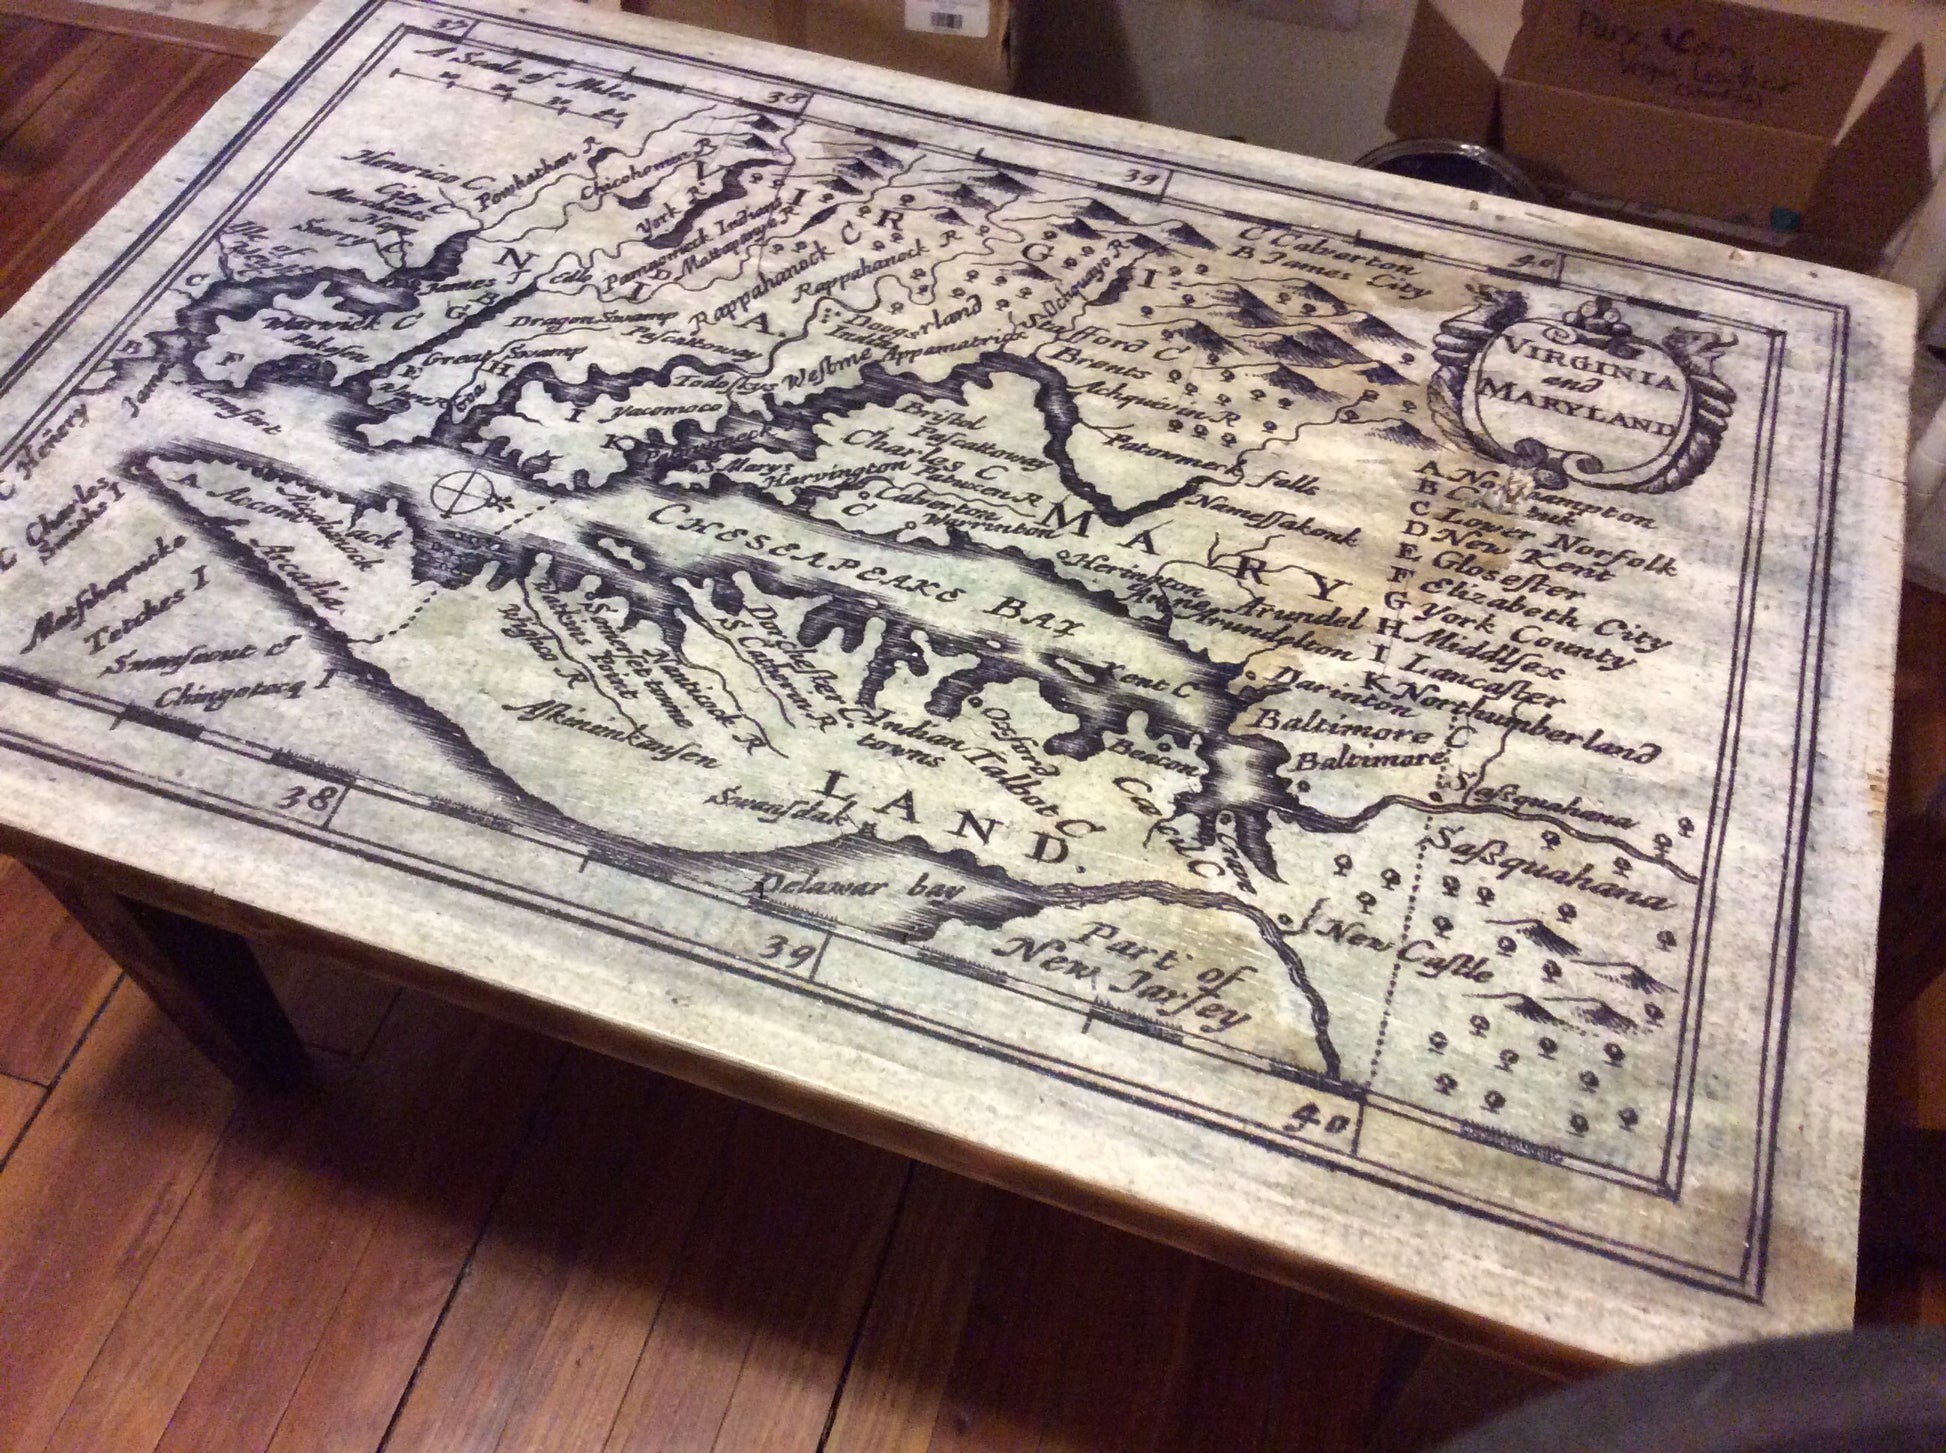 Coffee table, Domino Sugar Factory, With Map of Va, Md, and Chesapeake Bay - Annapolis Maritime Antiques